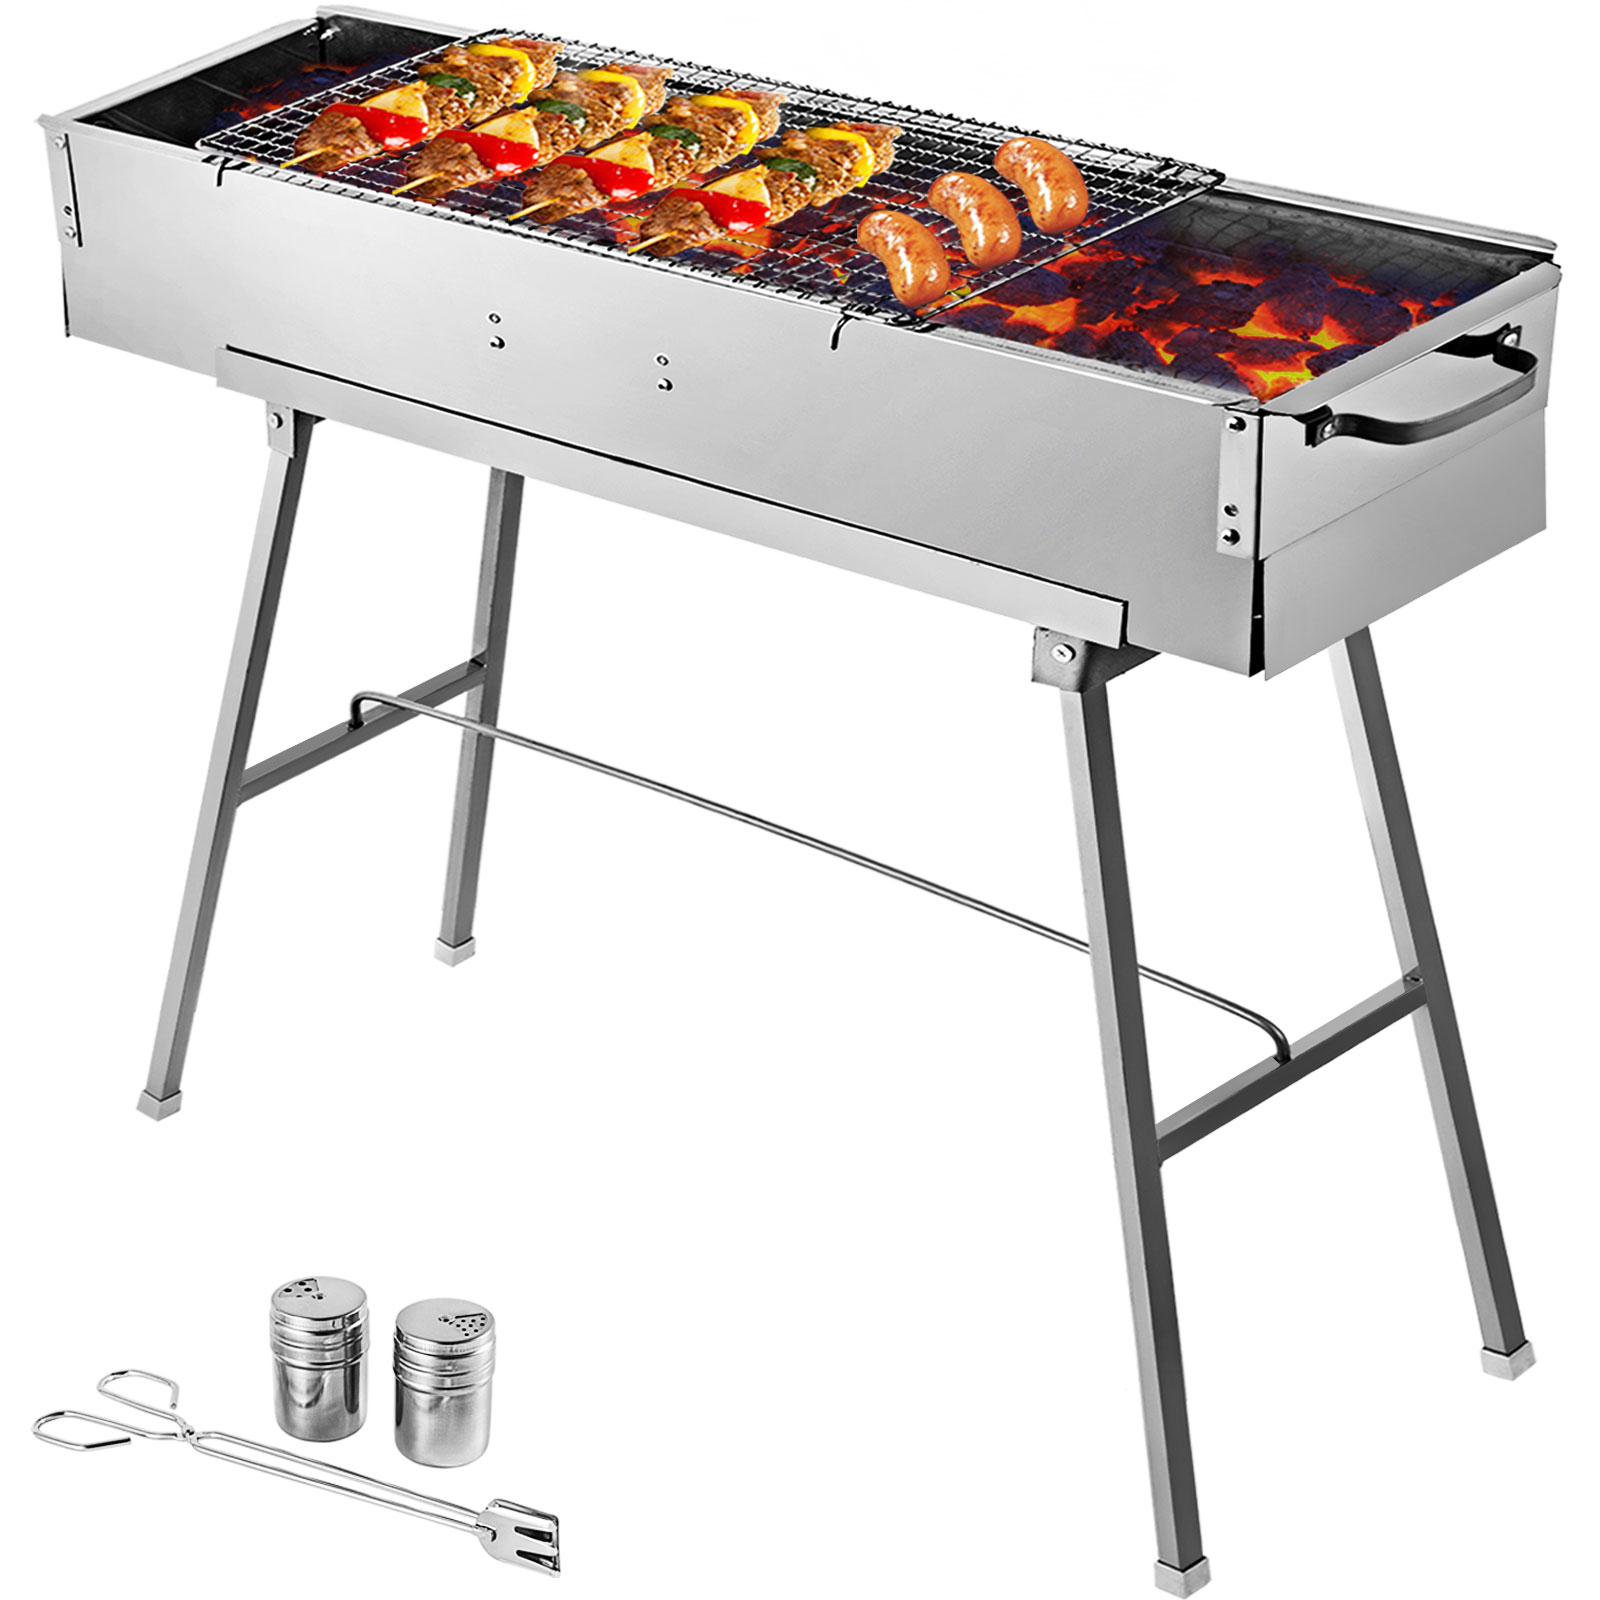 VEVOR Folded Portable Charcoal BBQ Grill,34x8 inches Outdoor Barbecue Kebab Folding Camping Grill - image 1 of 9